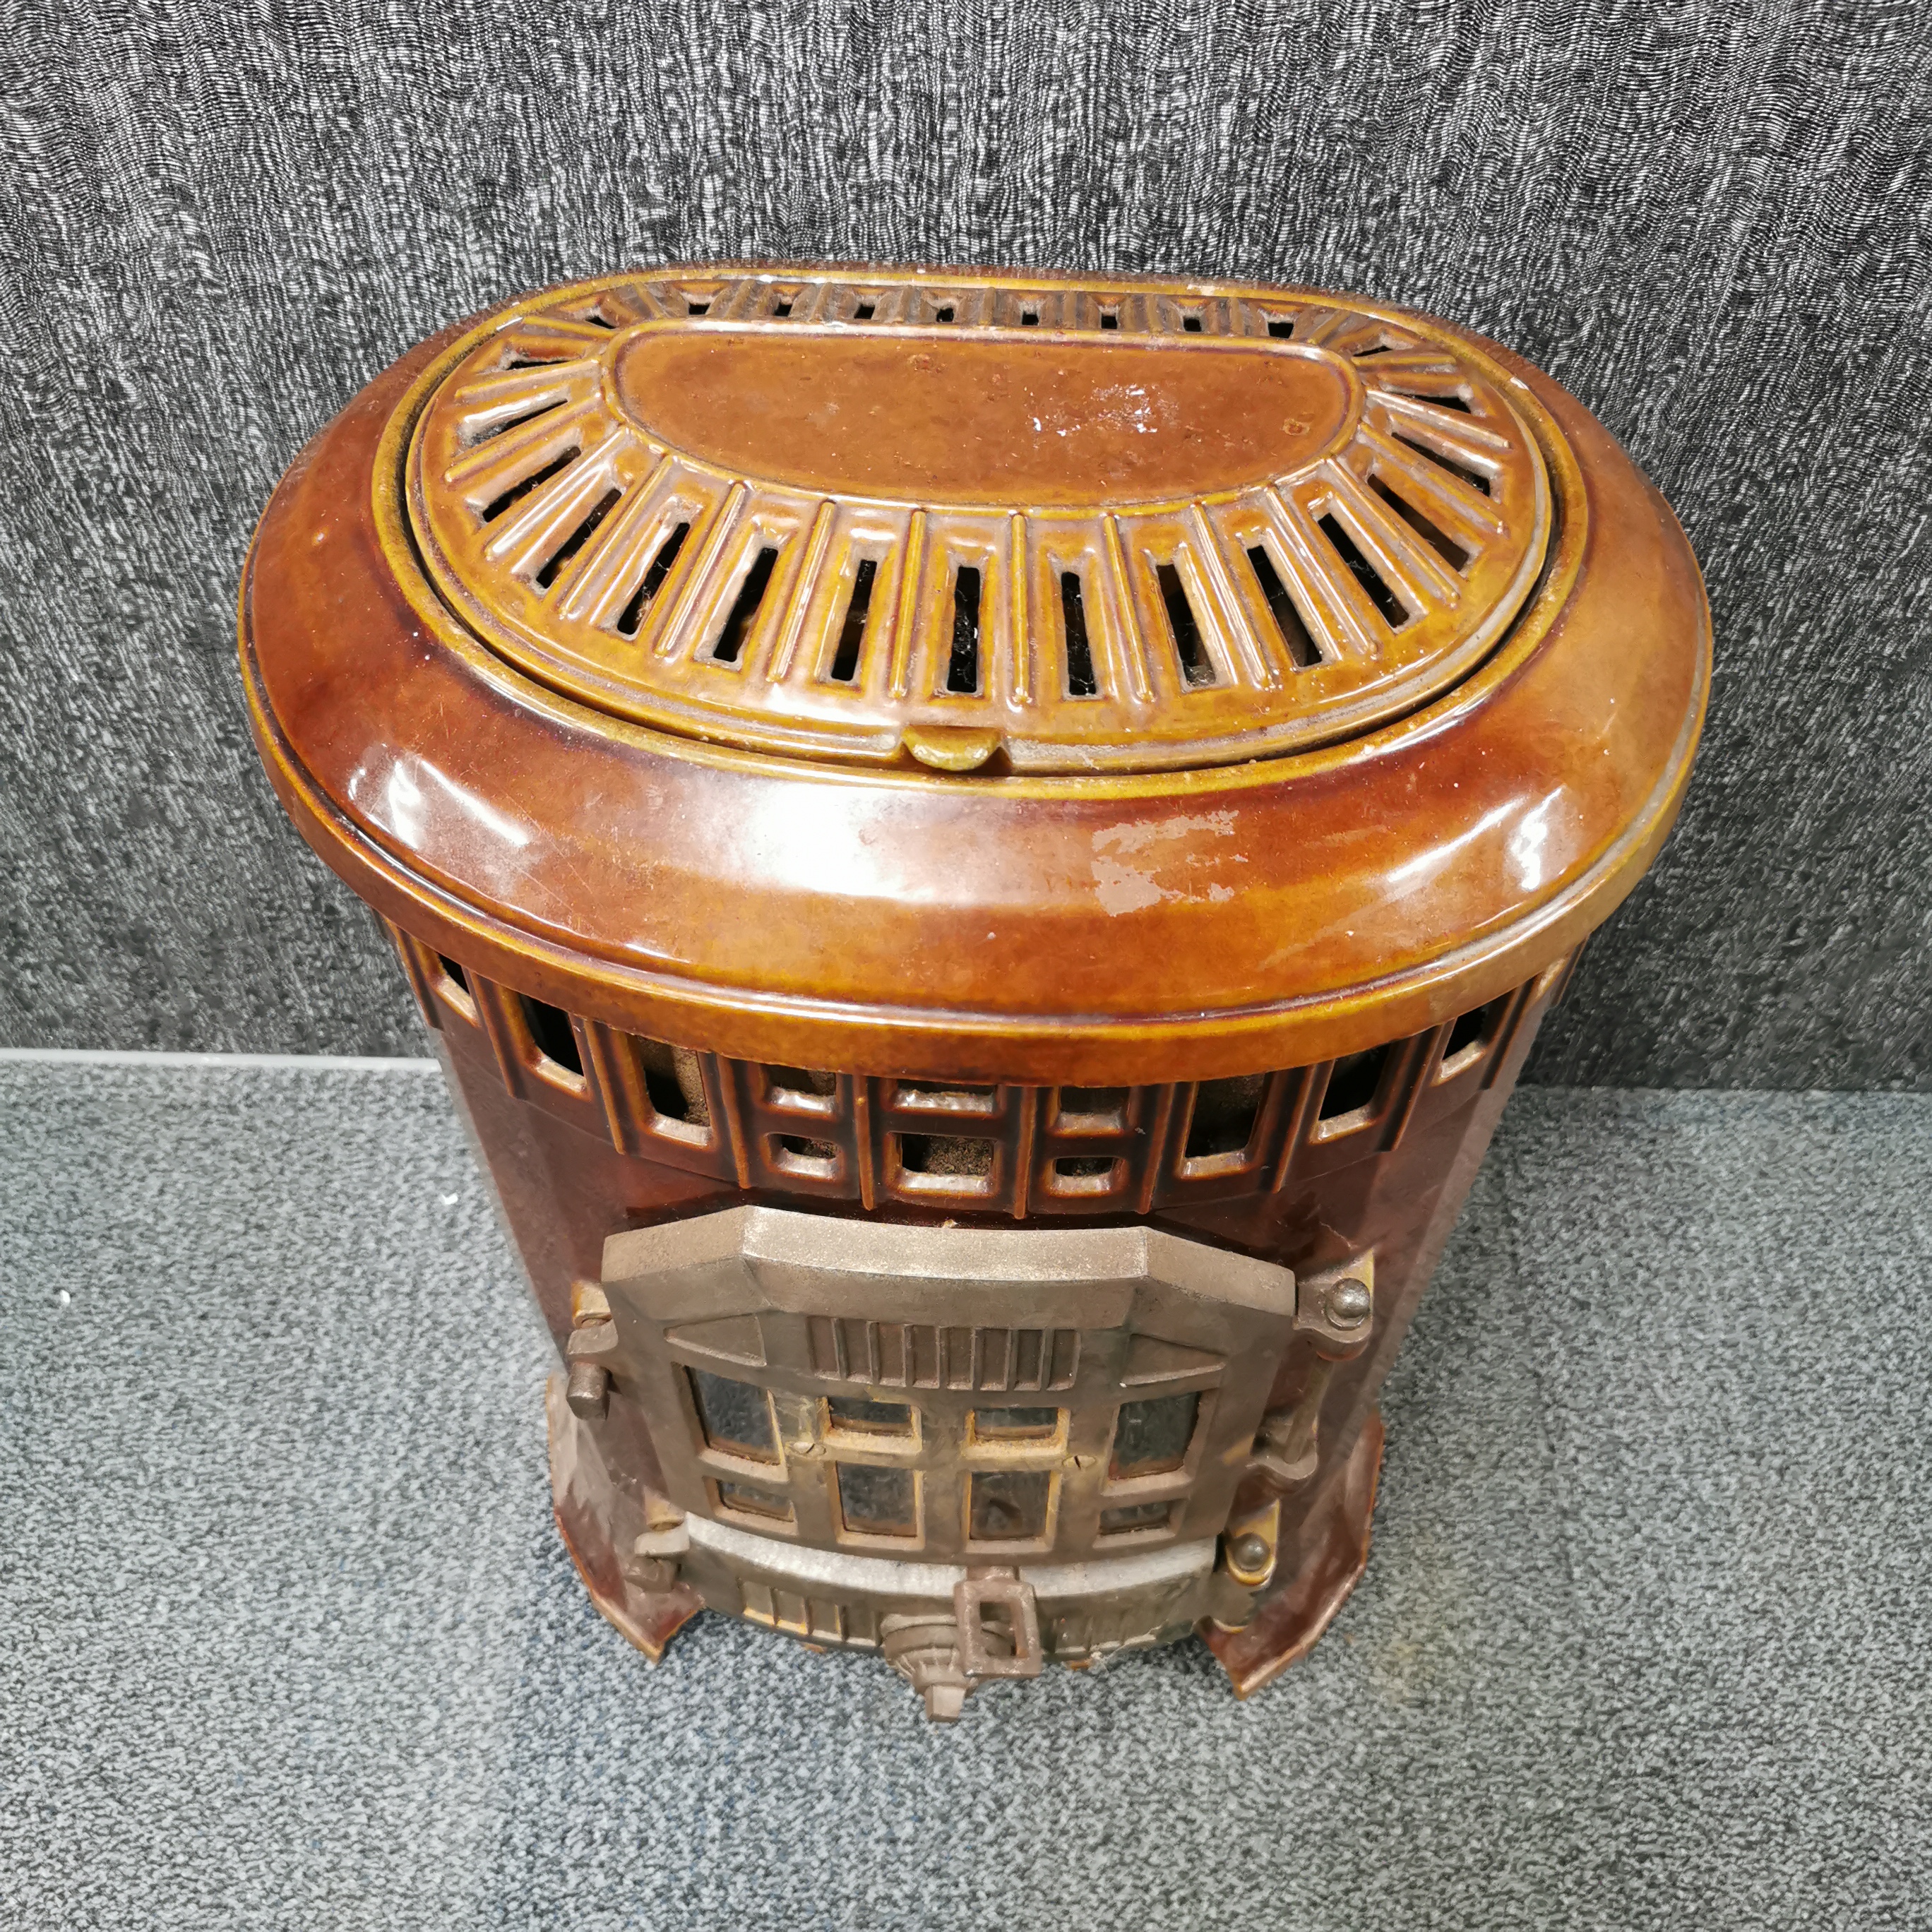 An antique French brown enamelled wood burning stove, 65 x 40 x 30cm. - Image 2 of 15